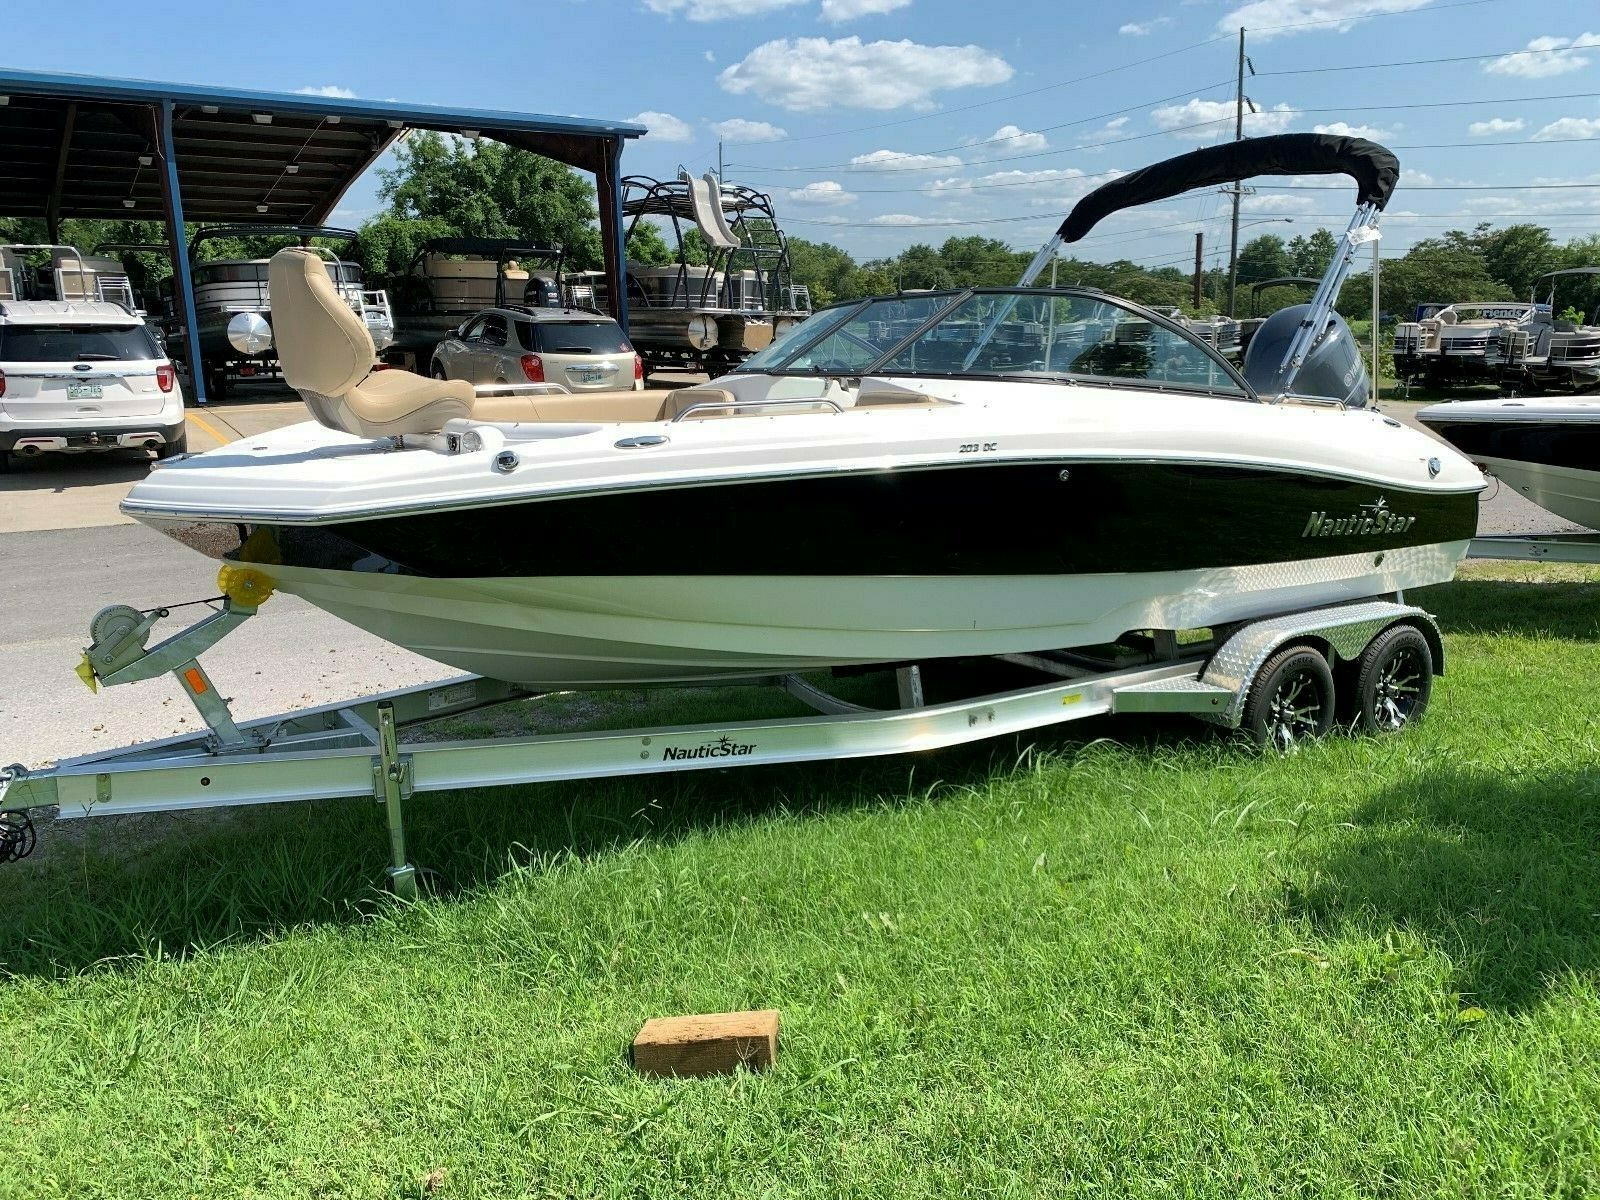 Nautic Star 203 DC 2019 for sale for 39,900